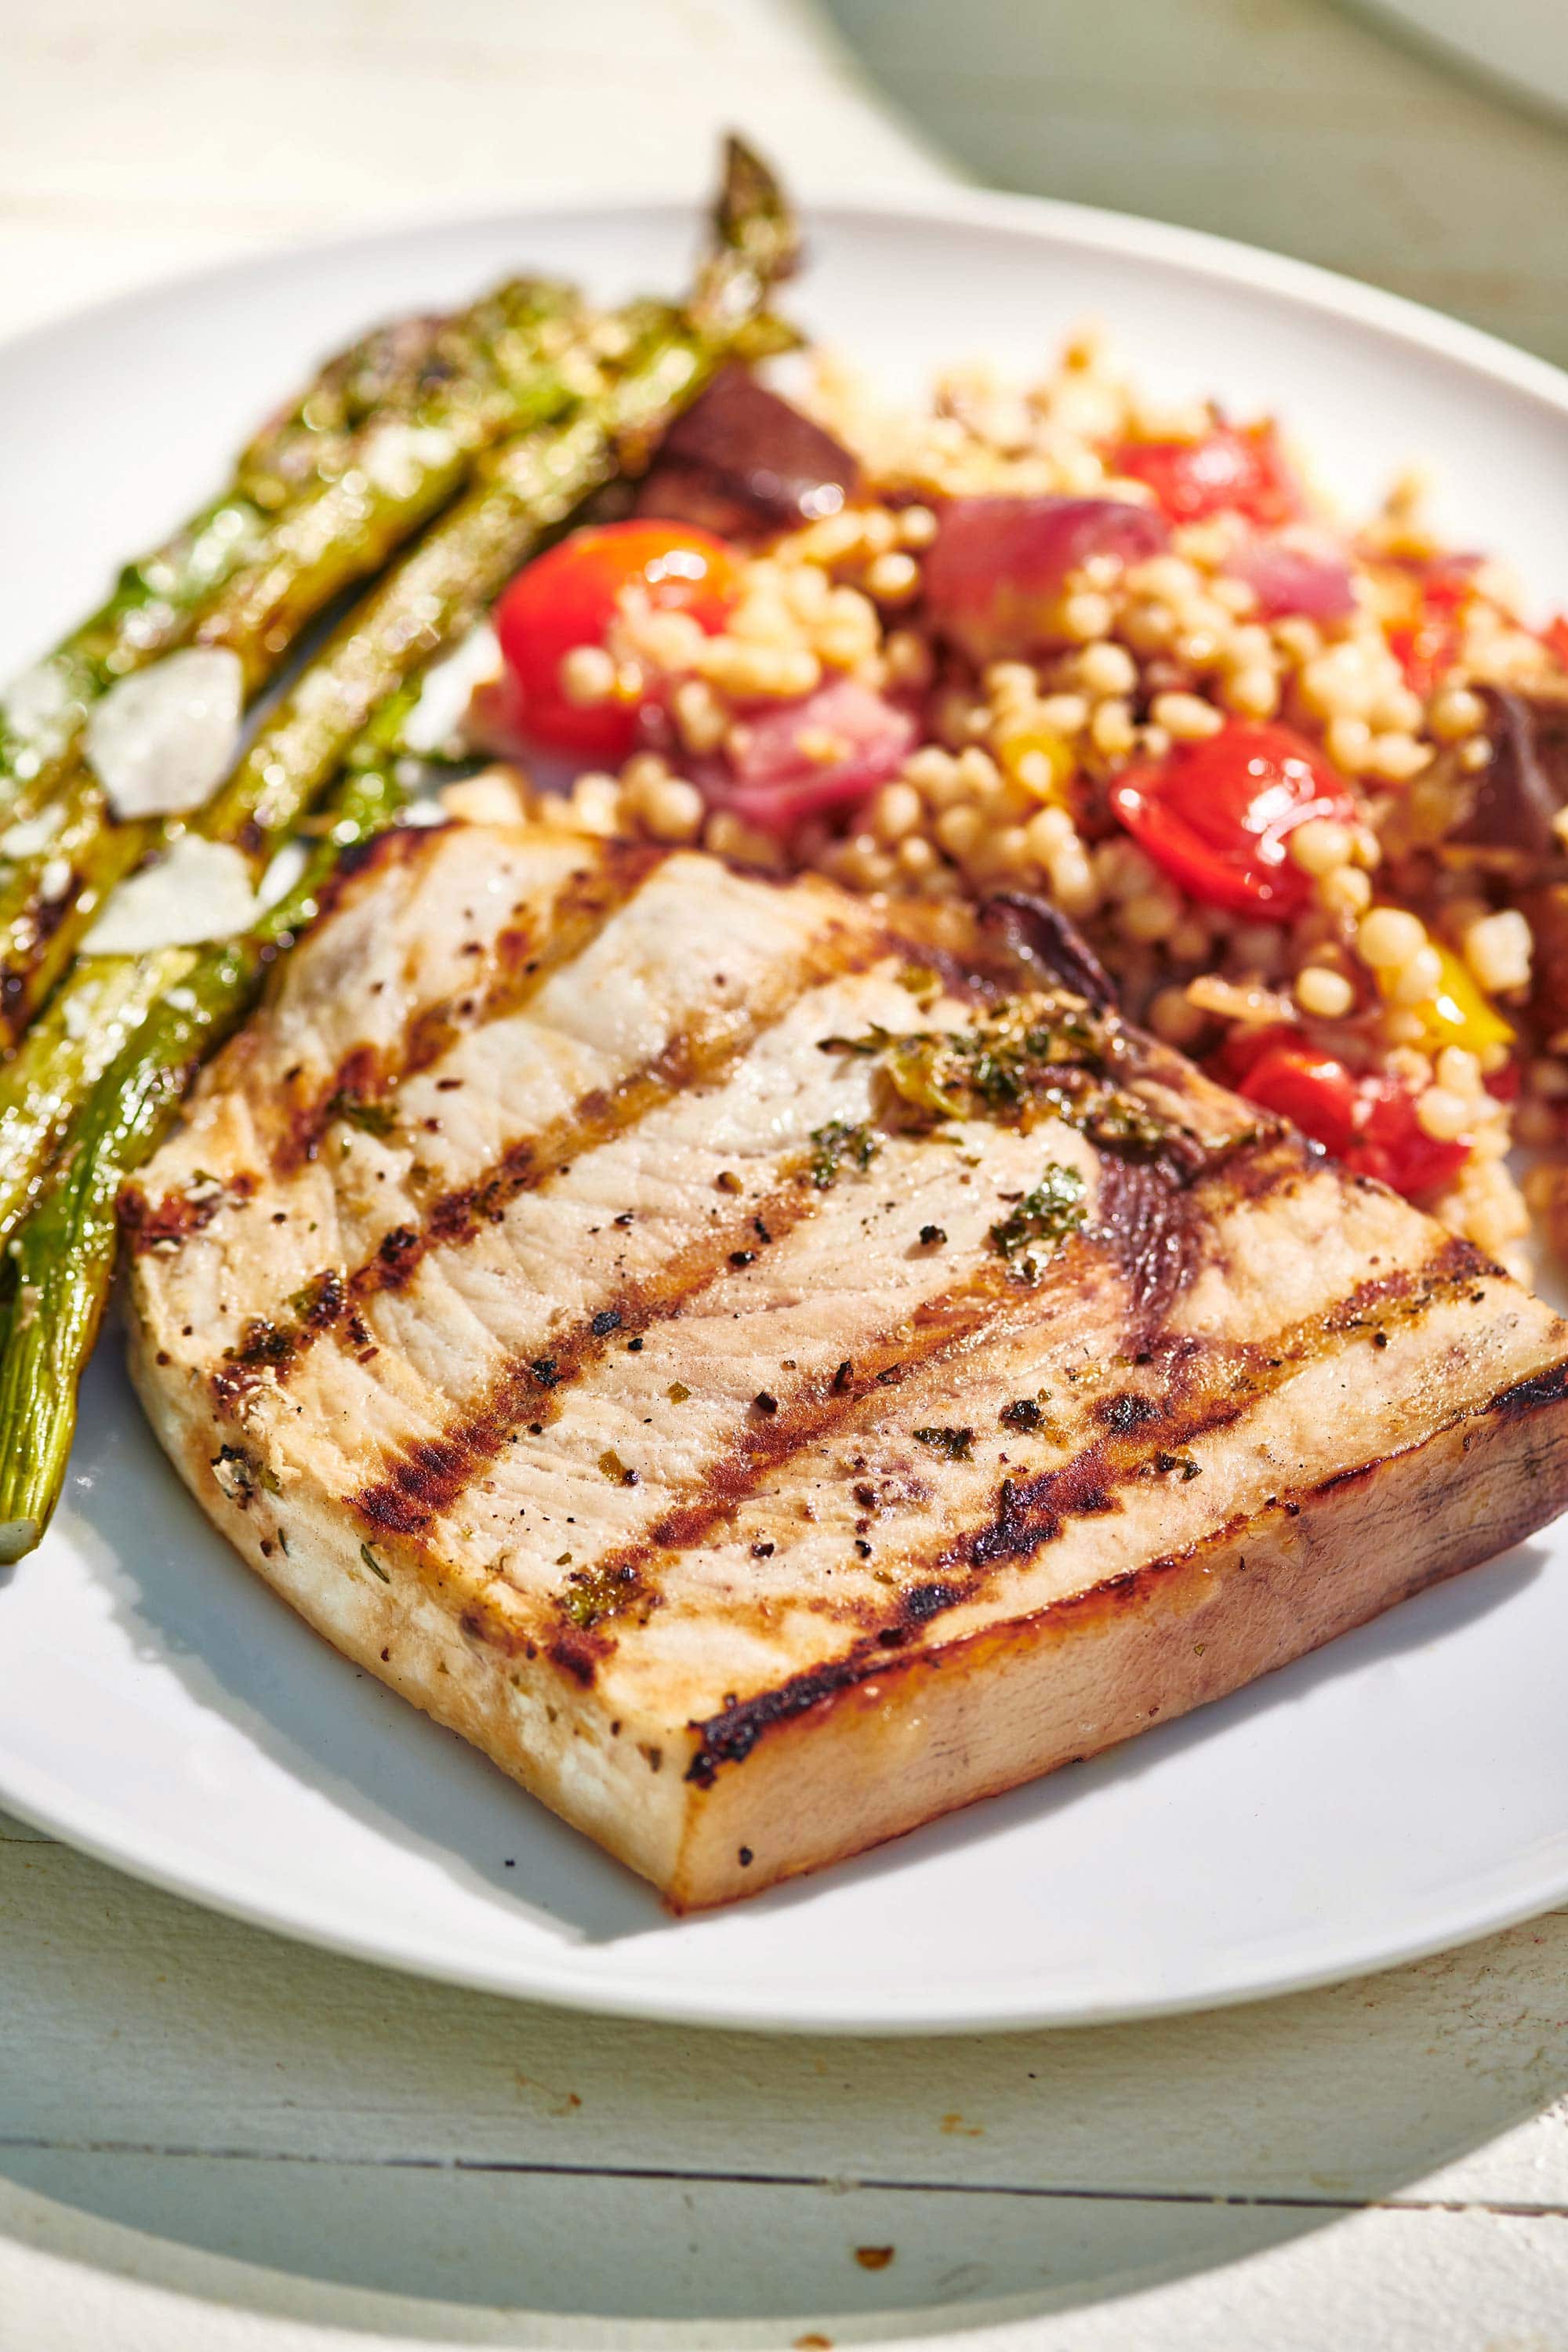 Swordfish with grill marks on a plate with asparagus and grain salad.